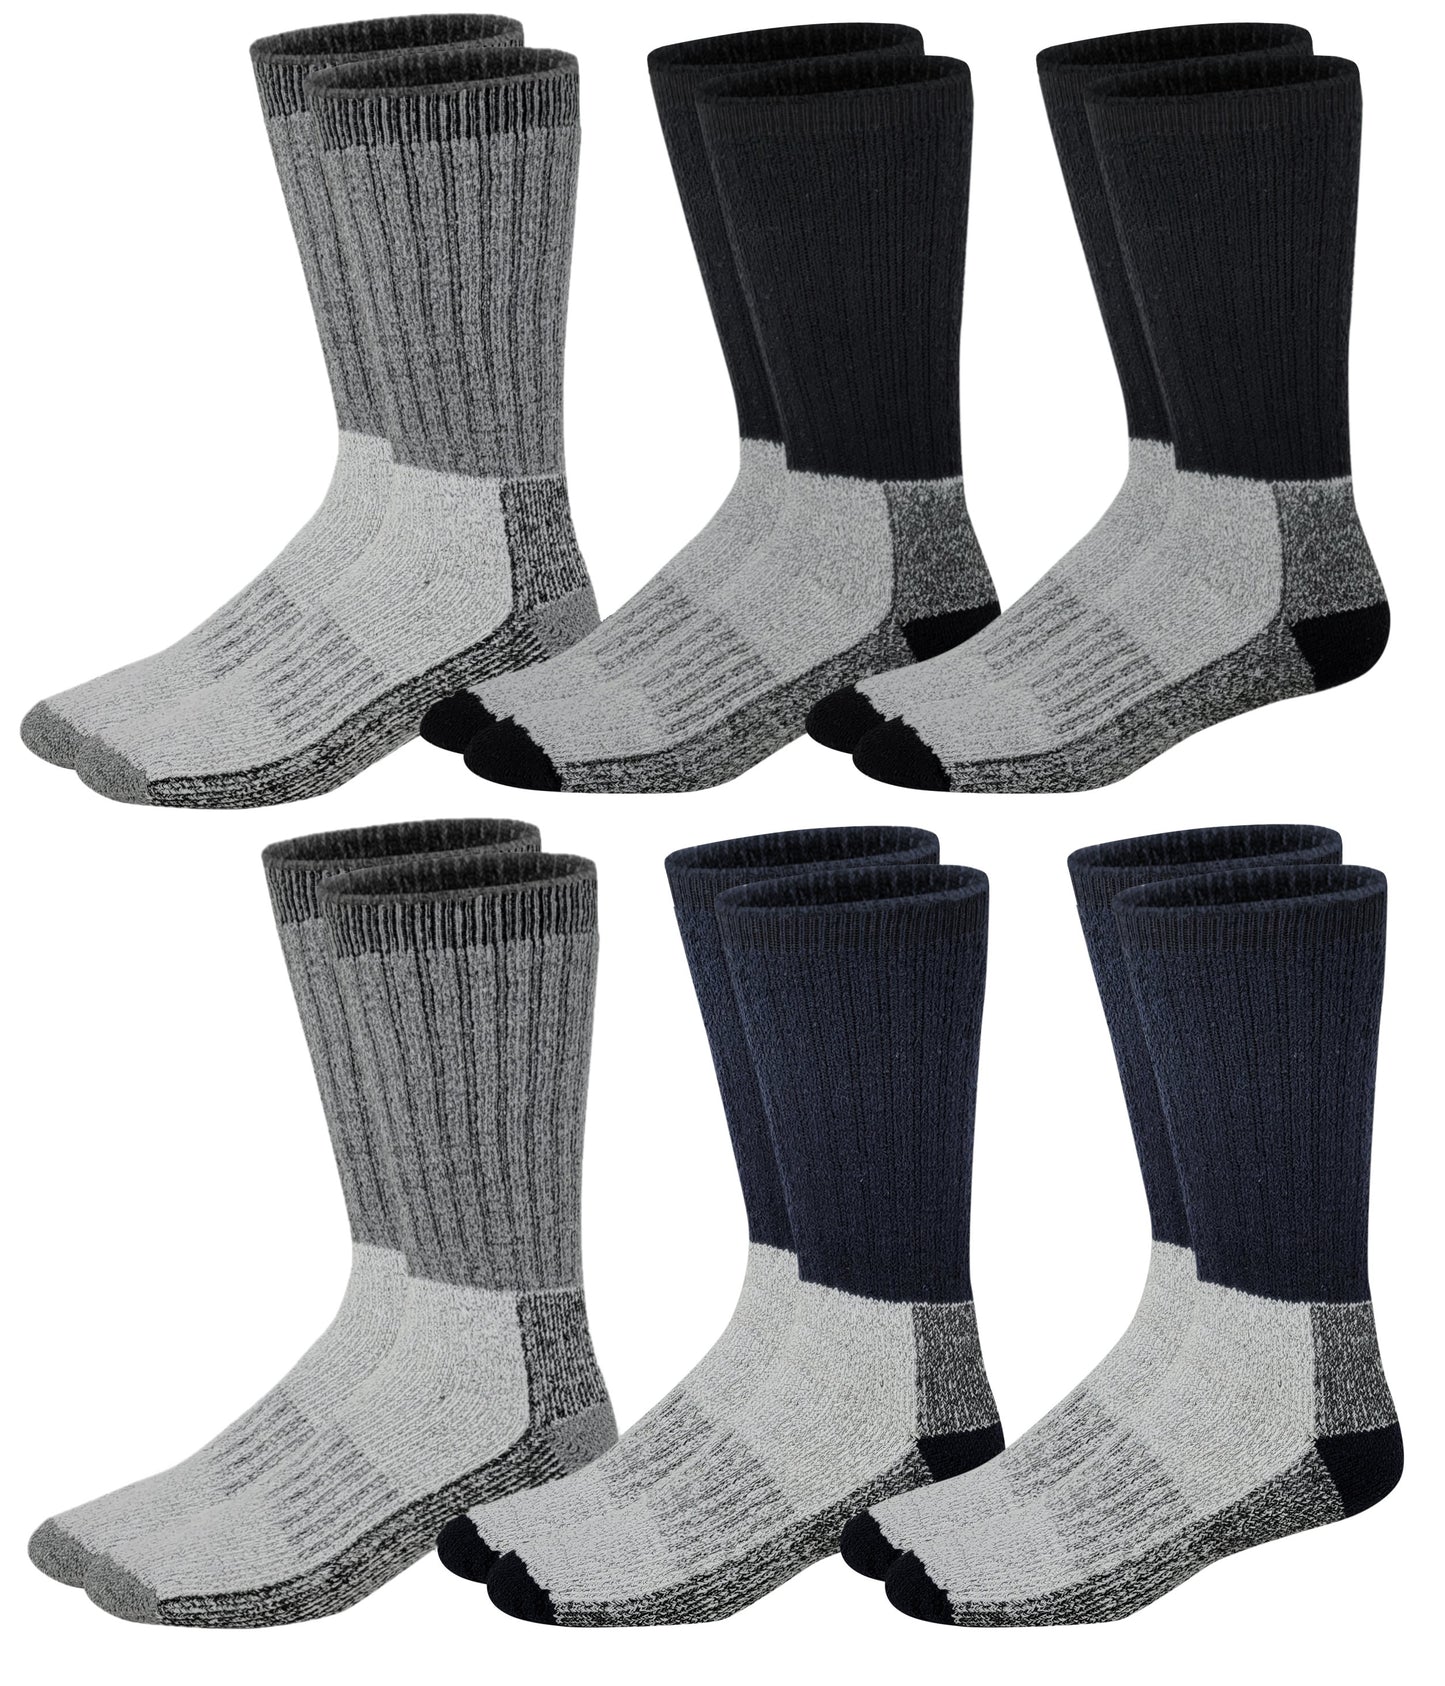 6 Pairs Assorted Color Men's Heavy Weight Wool Blend Thermal Winter Socks